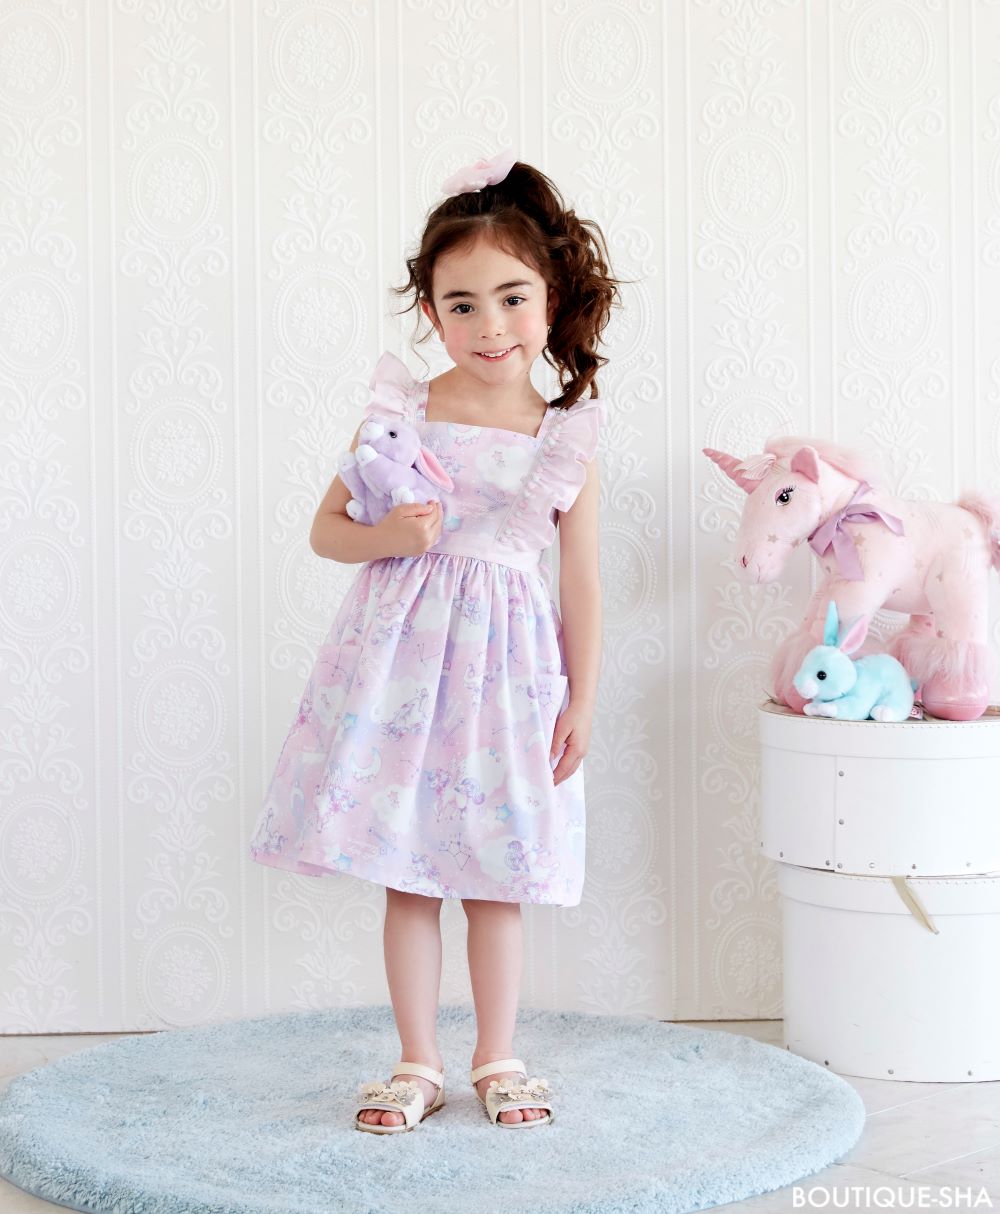 Easy hand-made childrens clothes 2019 summer